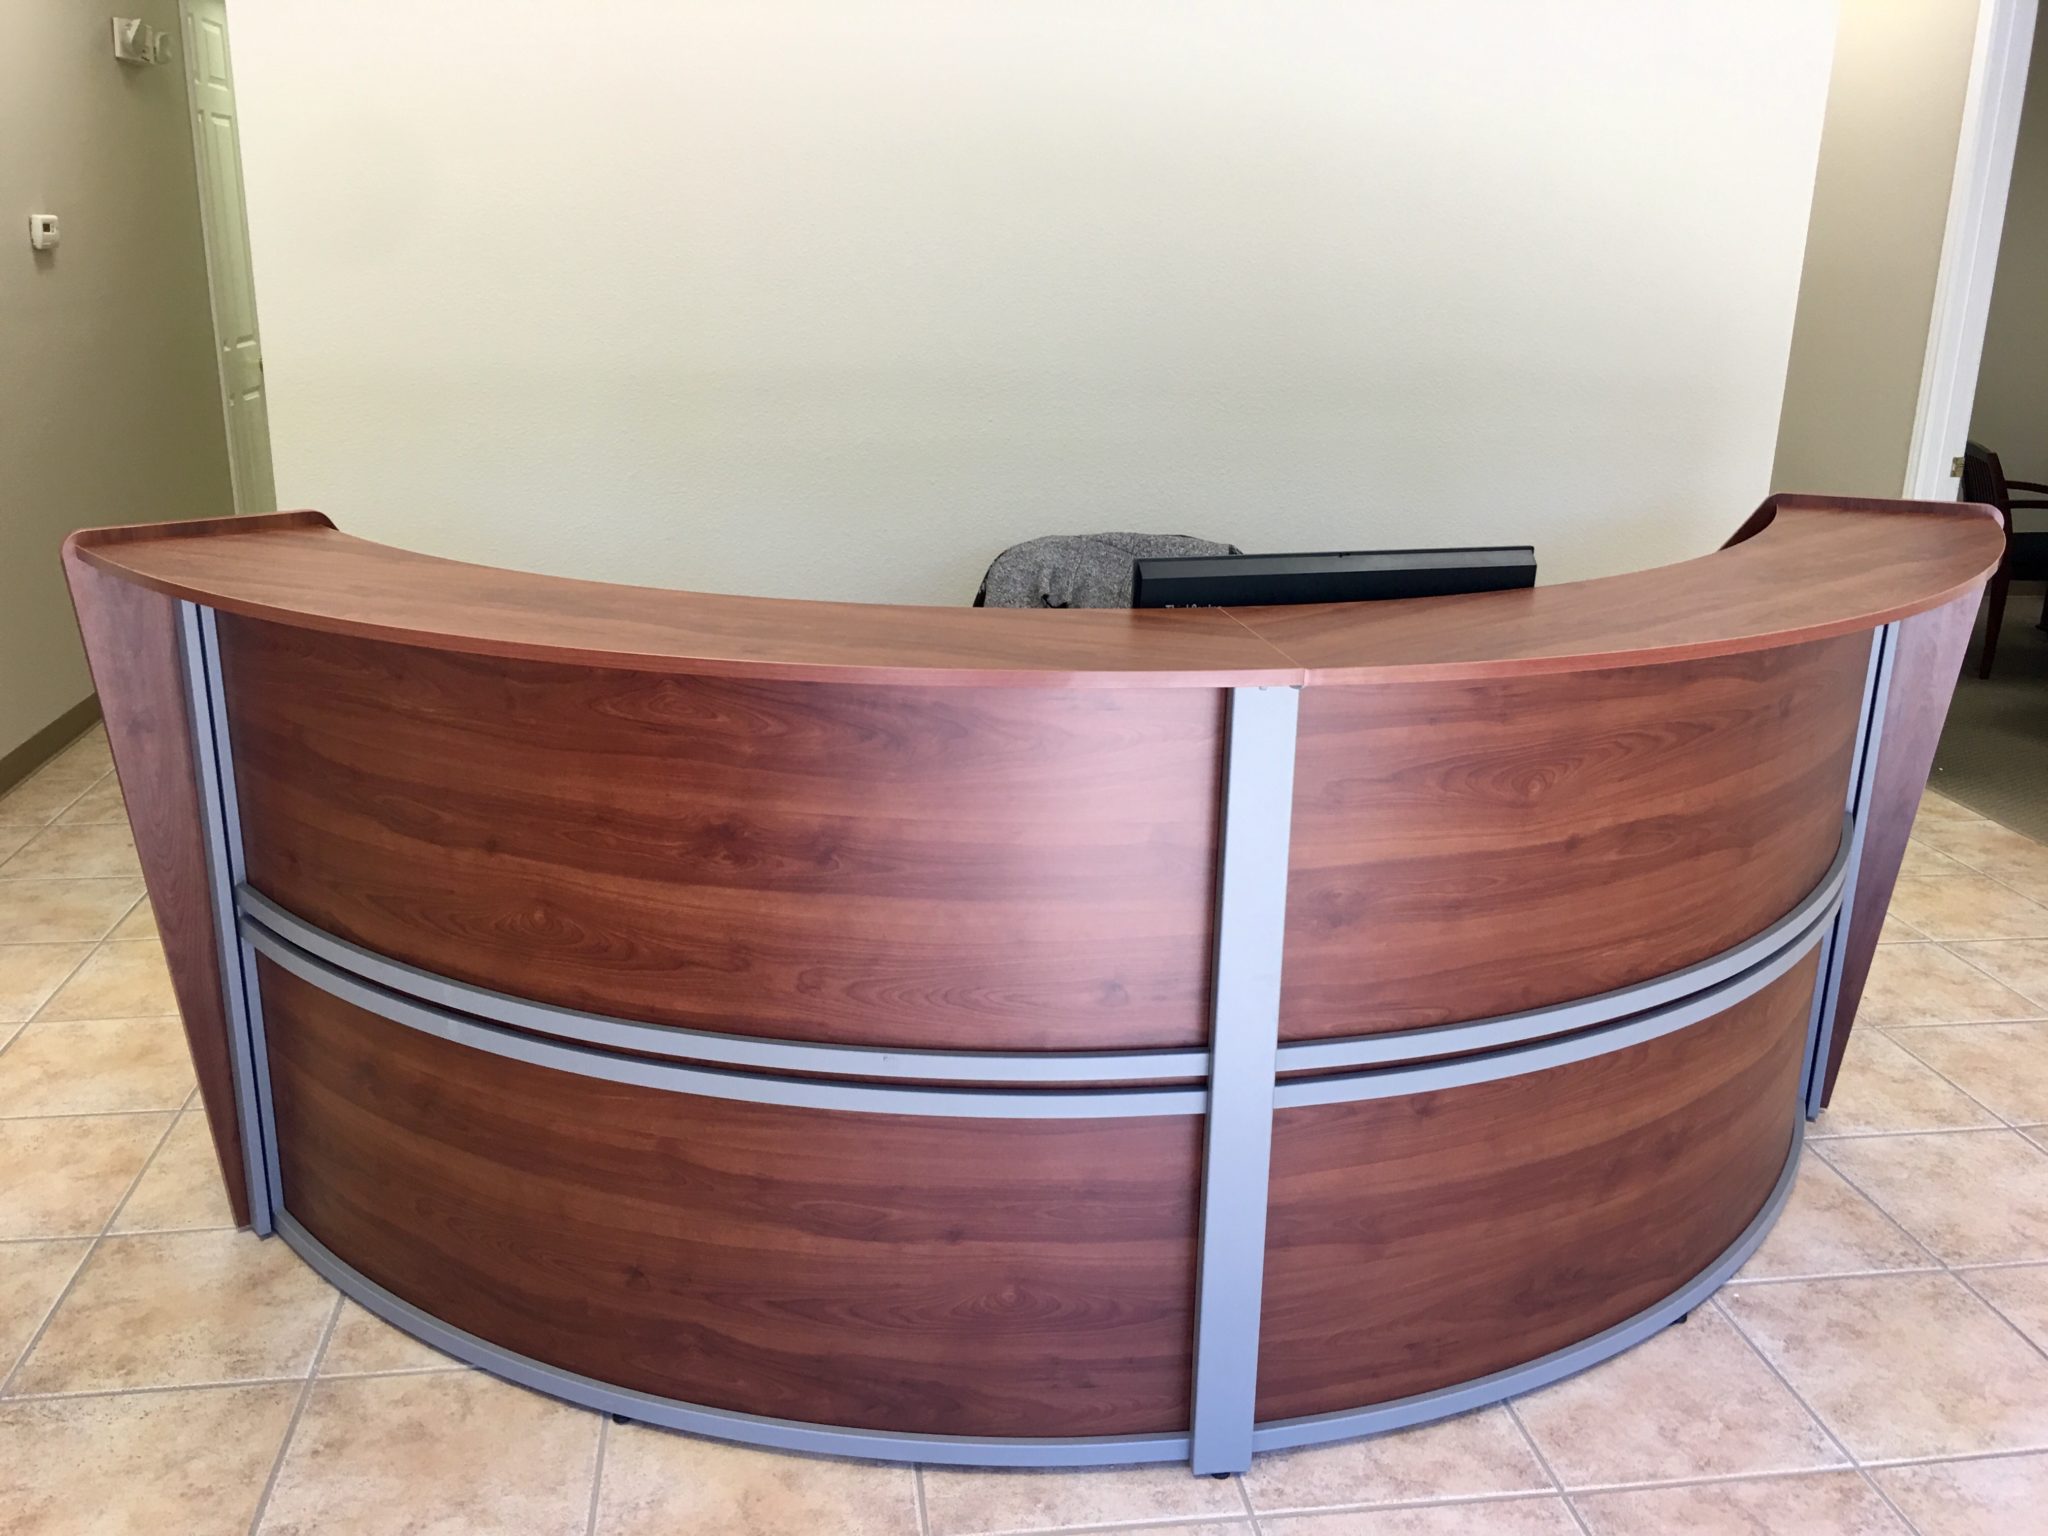 Half-Circle Reception Desk with Brushed Silver Trim